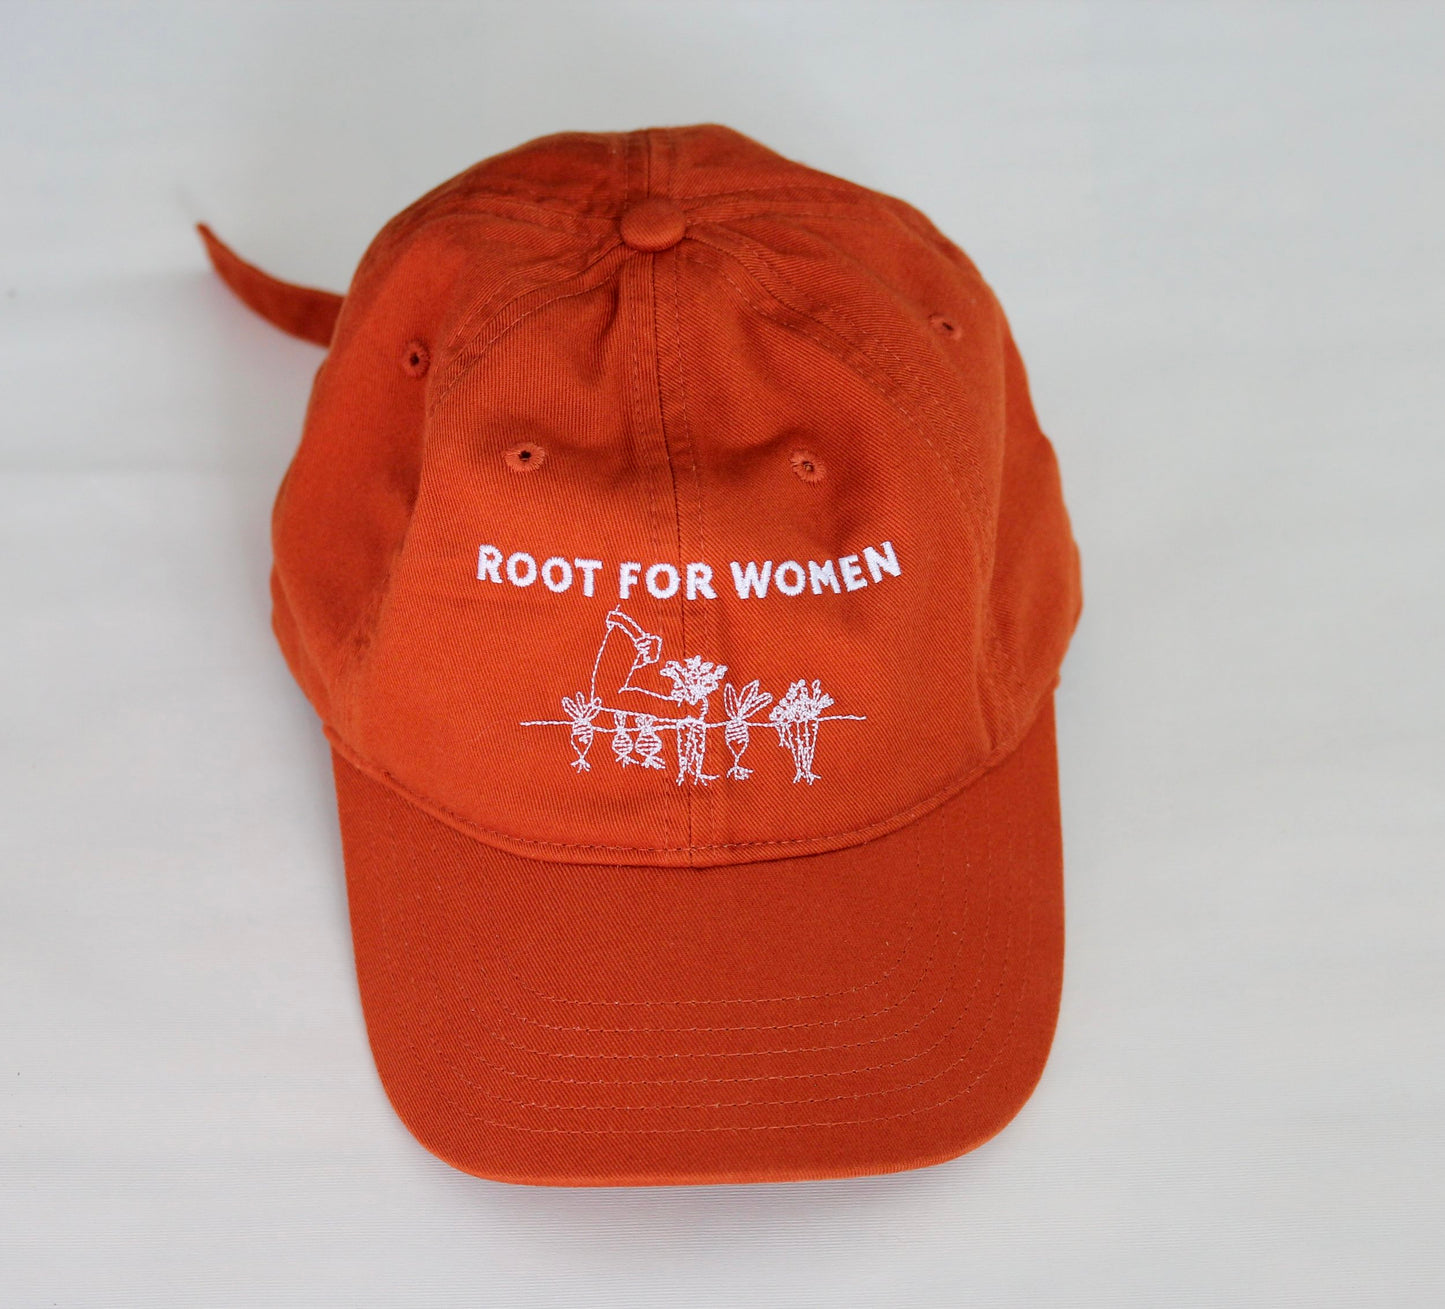 An orange baseball cap reads 'Root for women" in white embroidery 